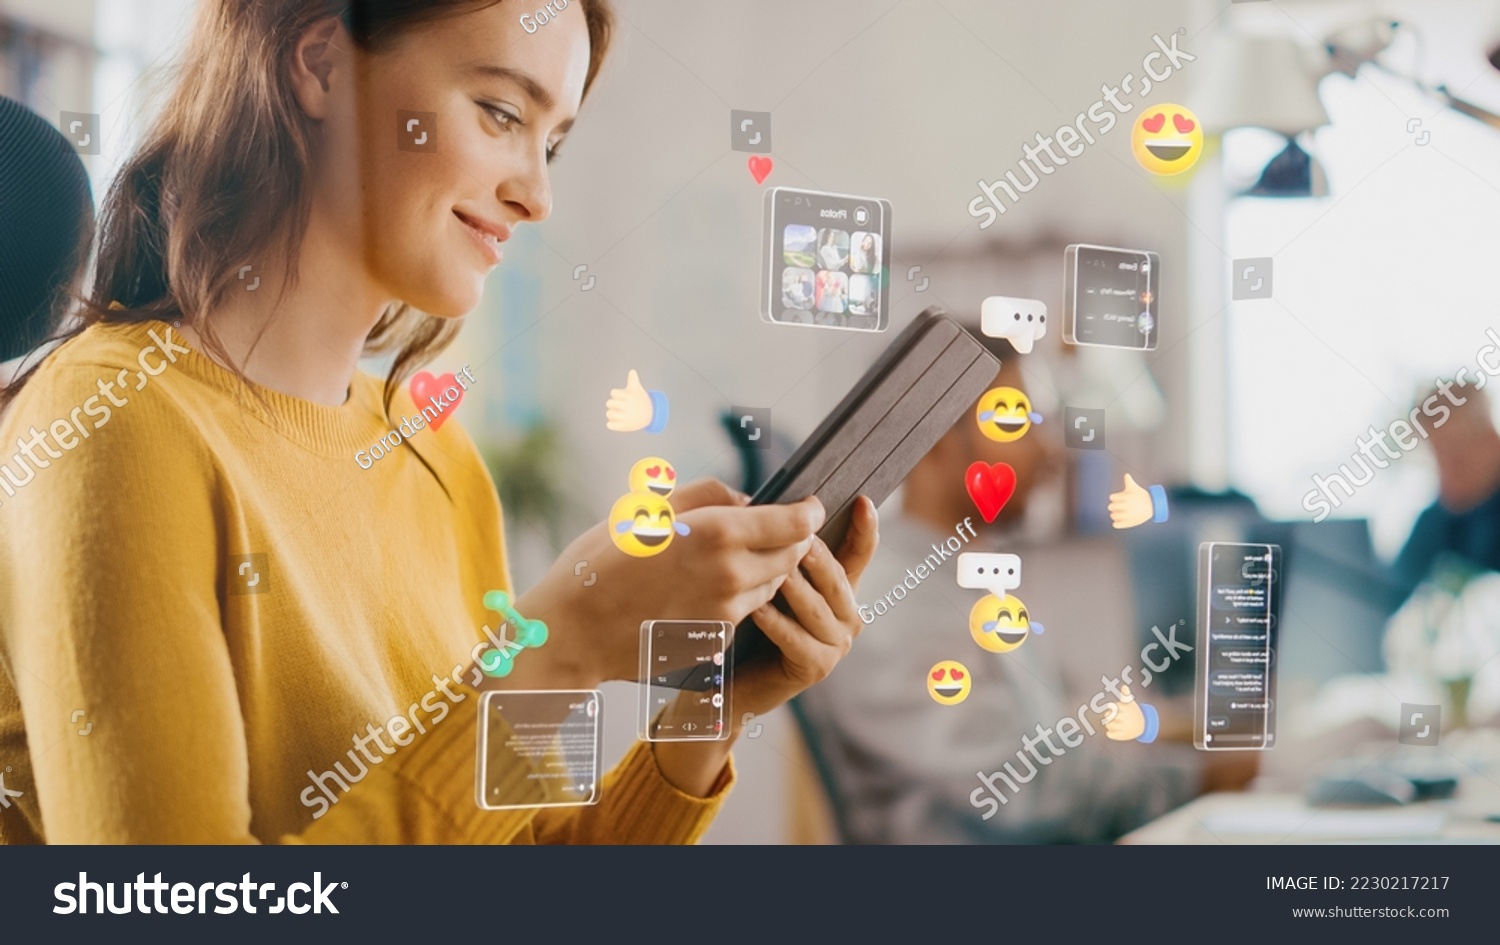 Social Media Visualization Concept: Happy Young Woman Uses Digital Tablet Computer in the Office, Social Media Posts, Smiley Faces, e-Commerce Online Shopping Digital Icons Flying Around the Device #2230217217